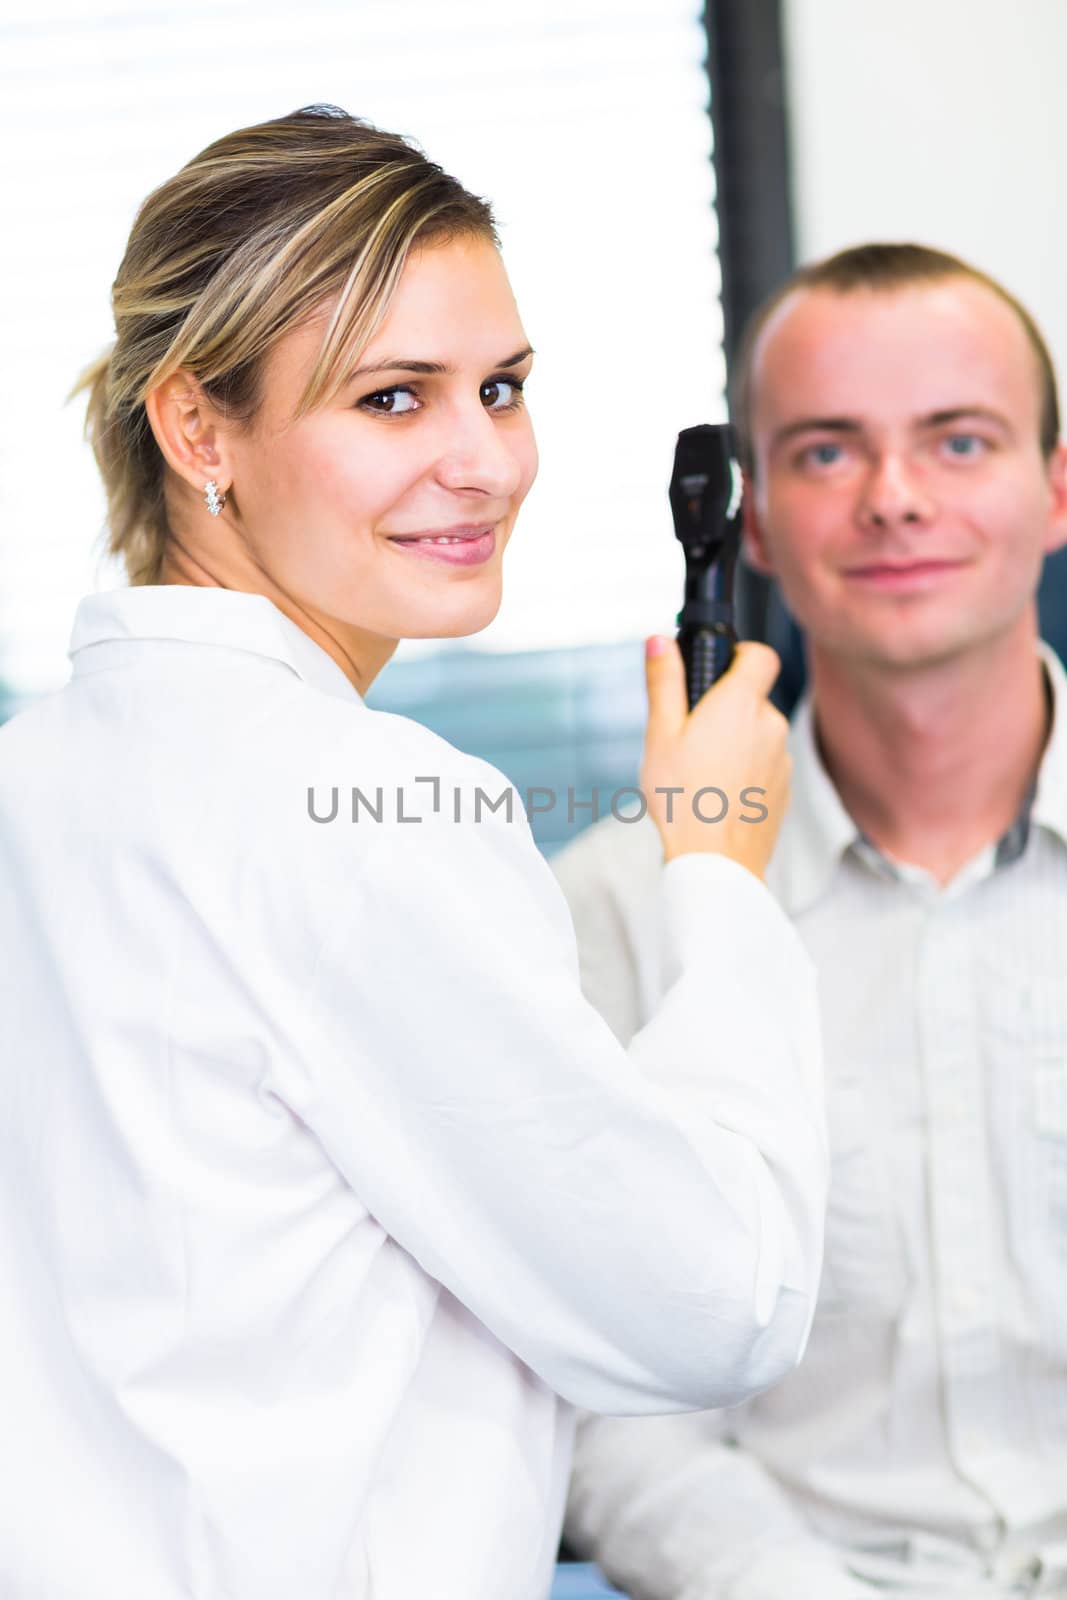 Optometry concept - handsome young man having her eyes examined  by viktor_cap